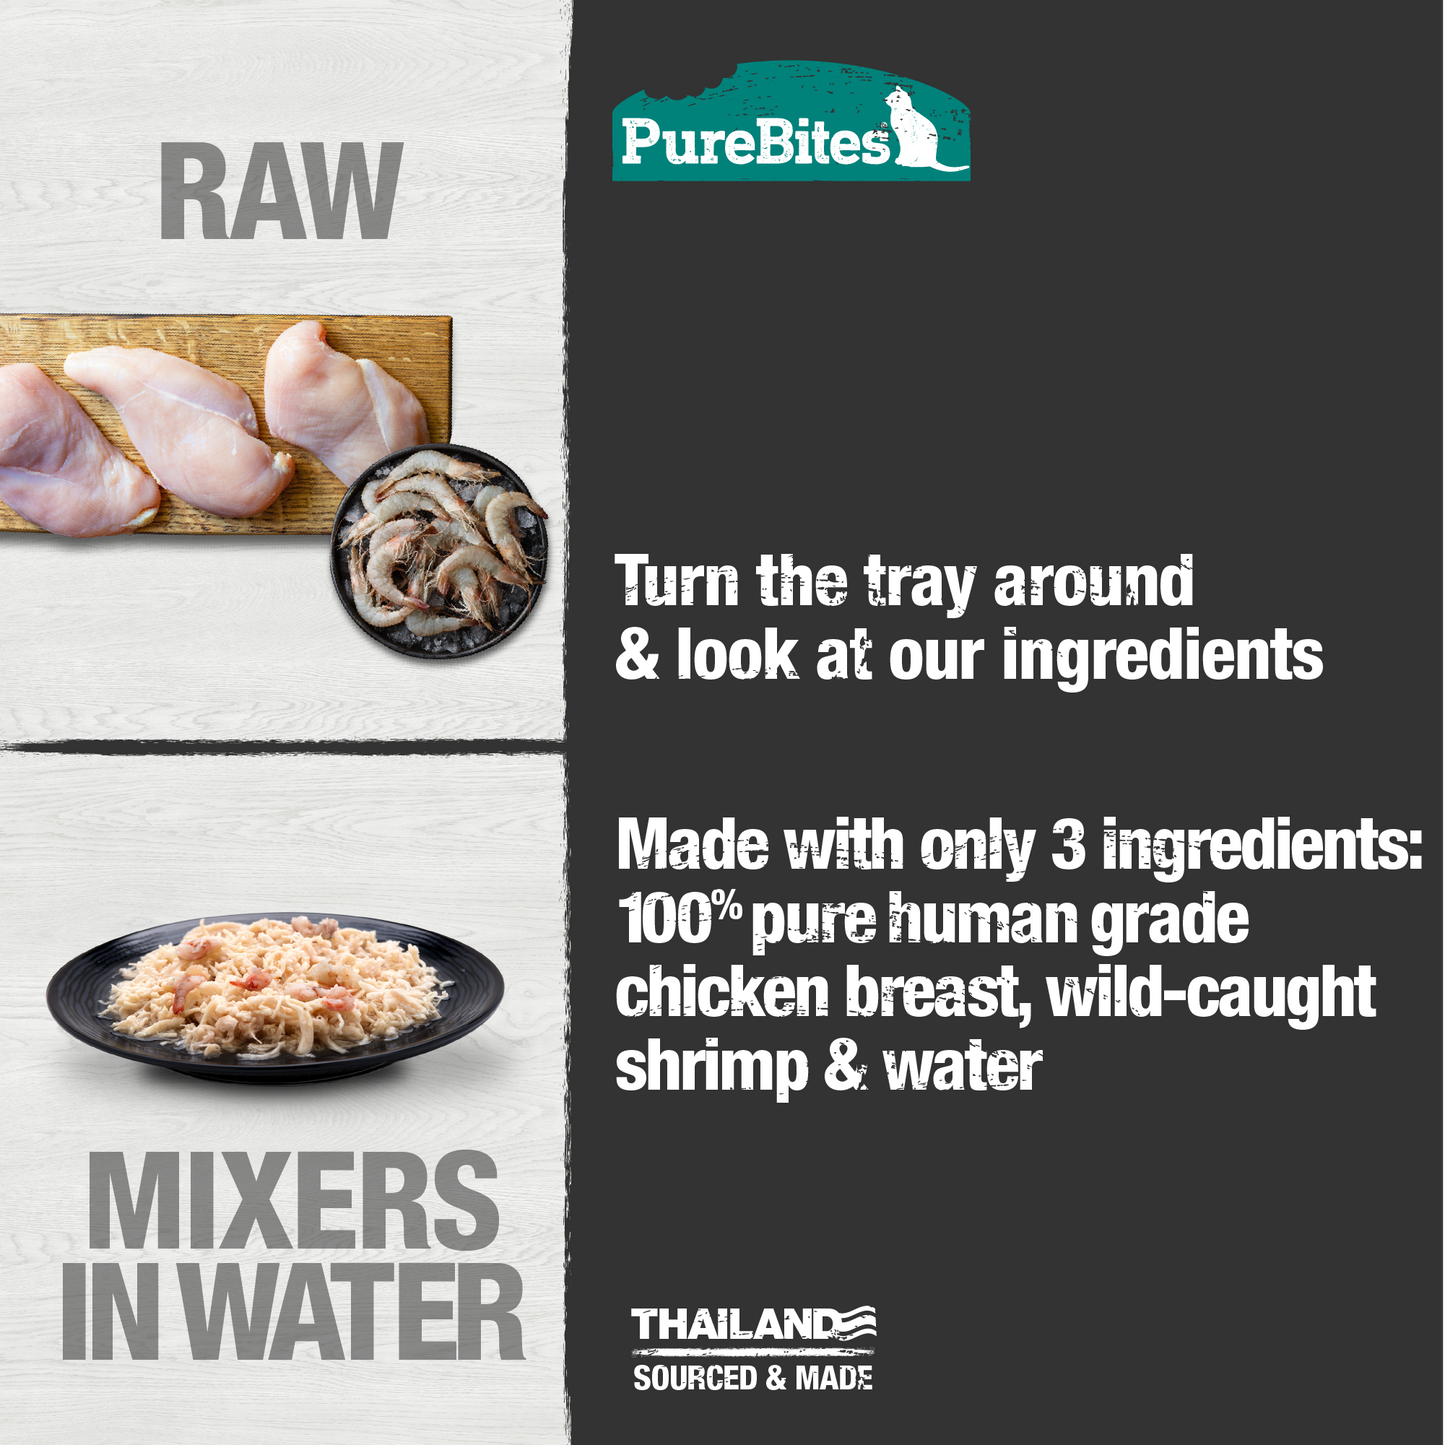 Made with only 3 Ingredients you can read, pronounce, and trust: Chicken breast, water, wild-caught shrimp.